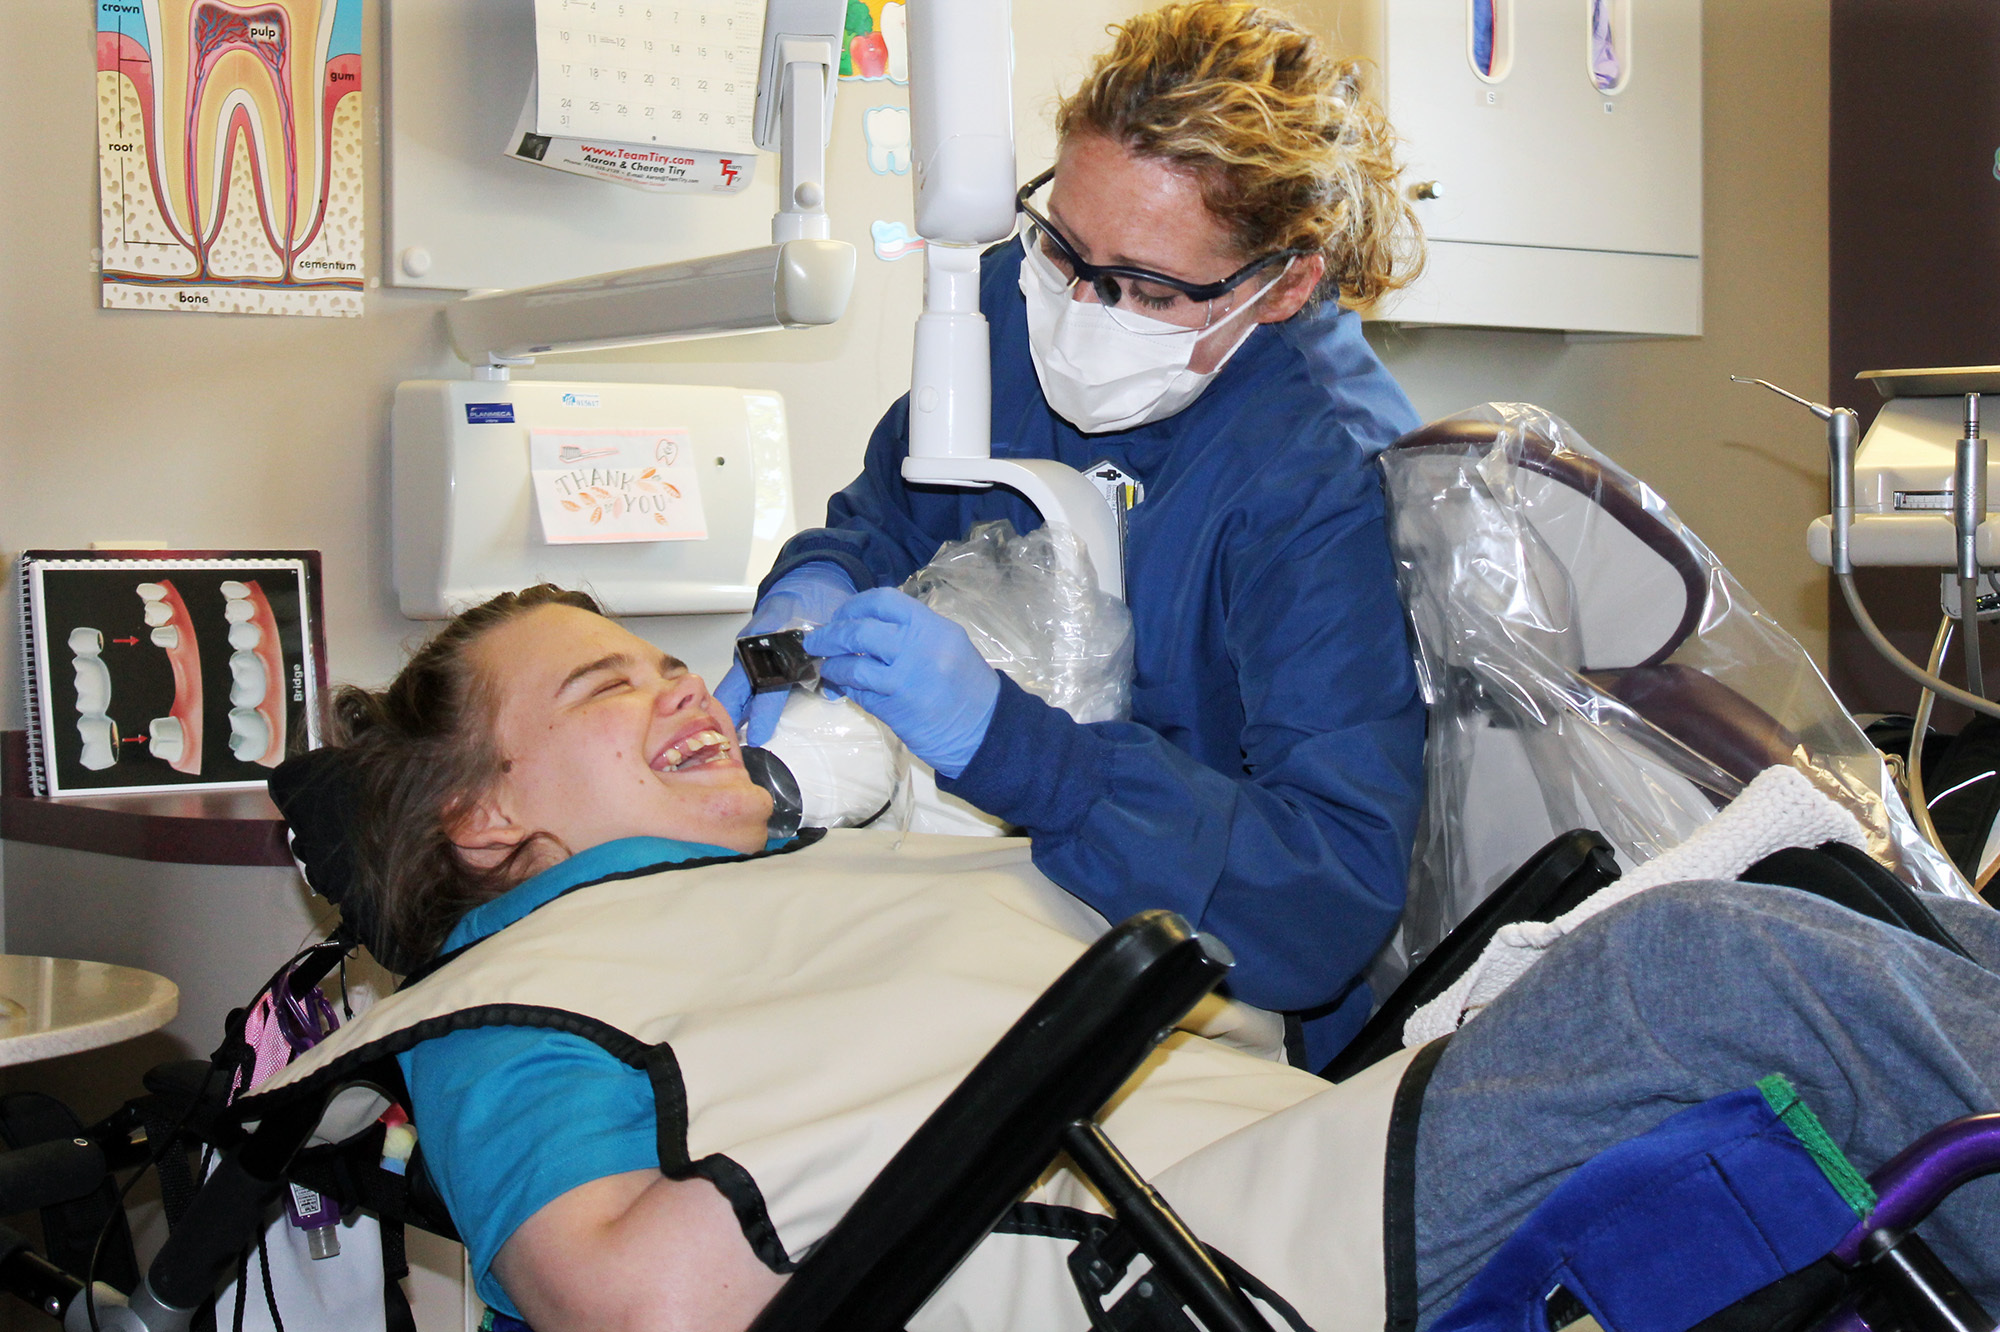 Lindsay Klecker has her teeth cleaned by Beth Rown, a dental hygenist who cares for patients with special needs. (Photo by Alison Kodjak/NPR)